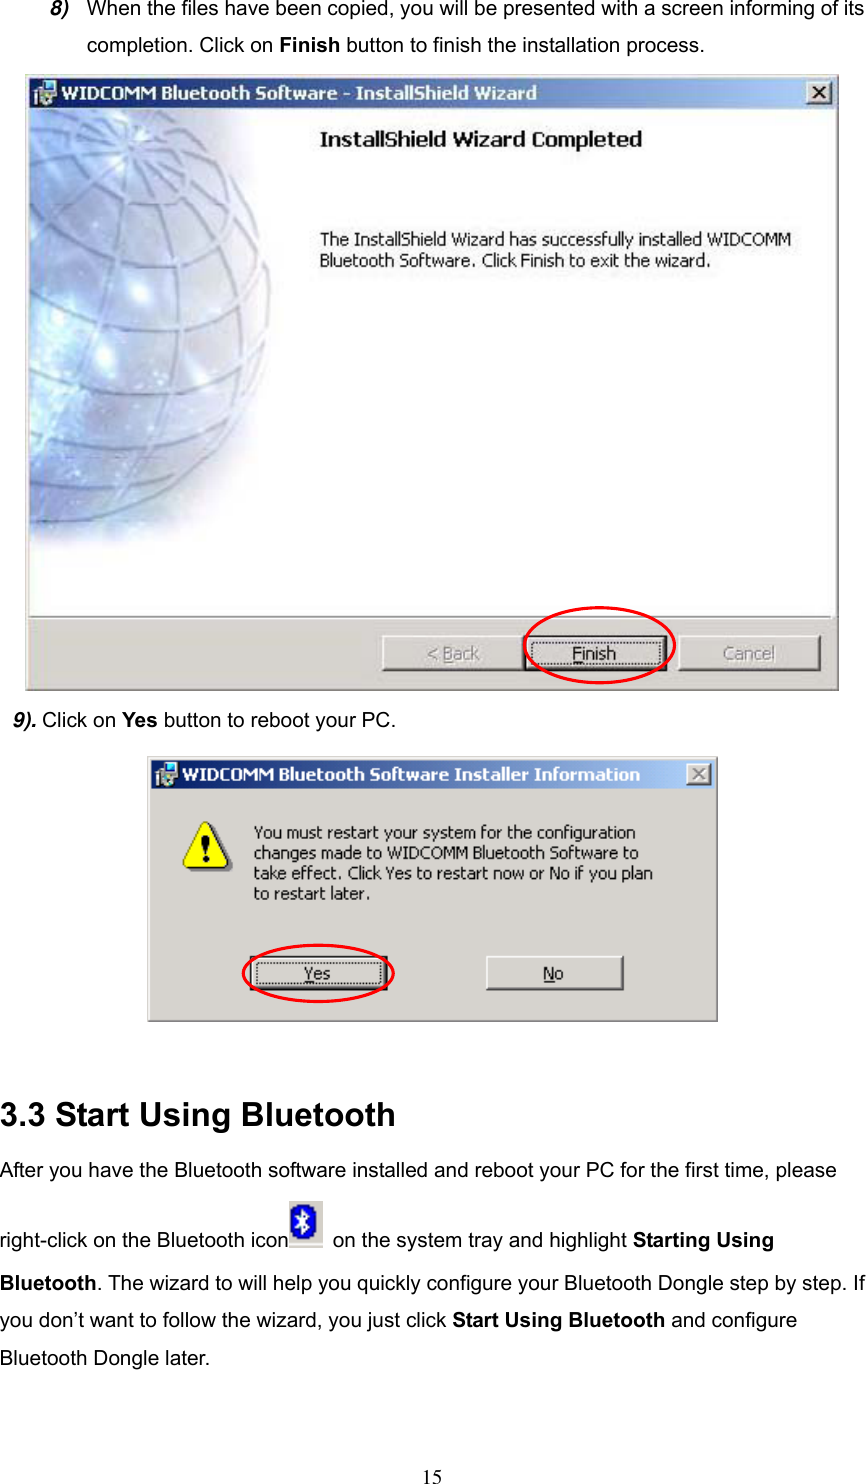 8)  When the files have been copied, you will be presented with a screen informing of its completion. Click on Finish button to finish the installation process.  9). Click on Yes button to reboot your PC.   3.3 Start Using Bluetooth After you have the Bluetooth software installed and reboot your PC for the first time, please right-click on the Bluetooth icon   on the system tray and highlight Starting Using Bluetooth. The wizard to will help you quickly configure your Bluetooth Dongle step by step. If you don’t want to follow the wizard, you just click Start Using Bluetooth and configure Bluetooth Dongle later.  15 